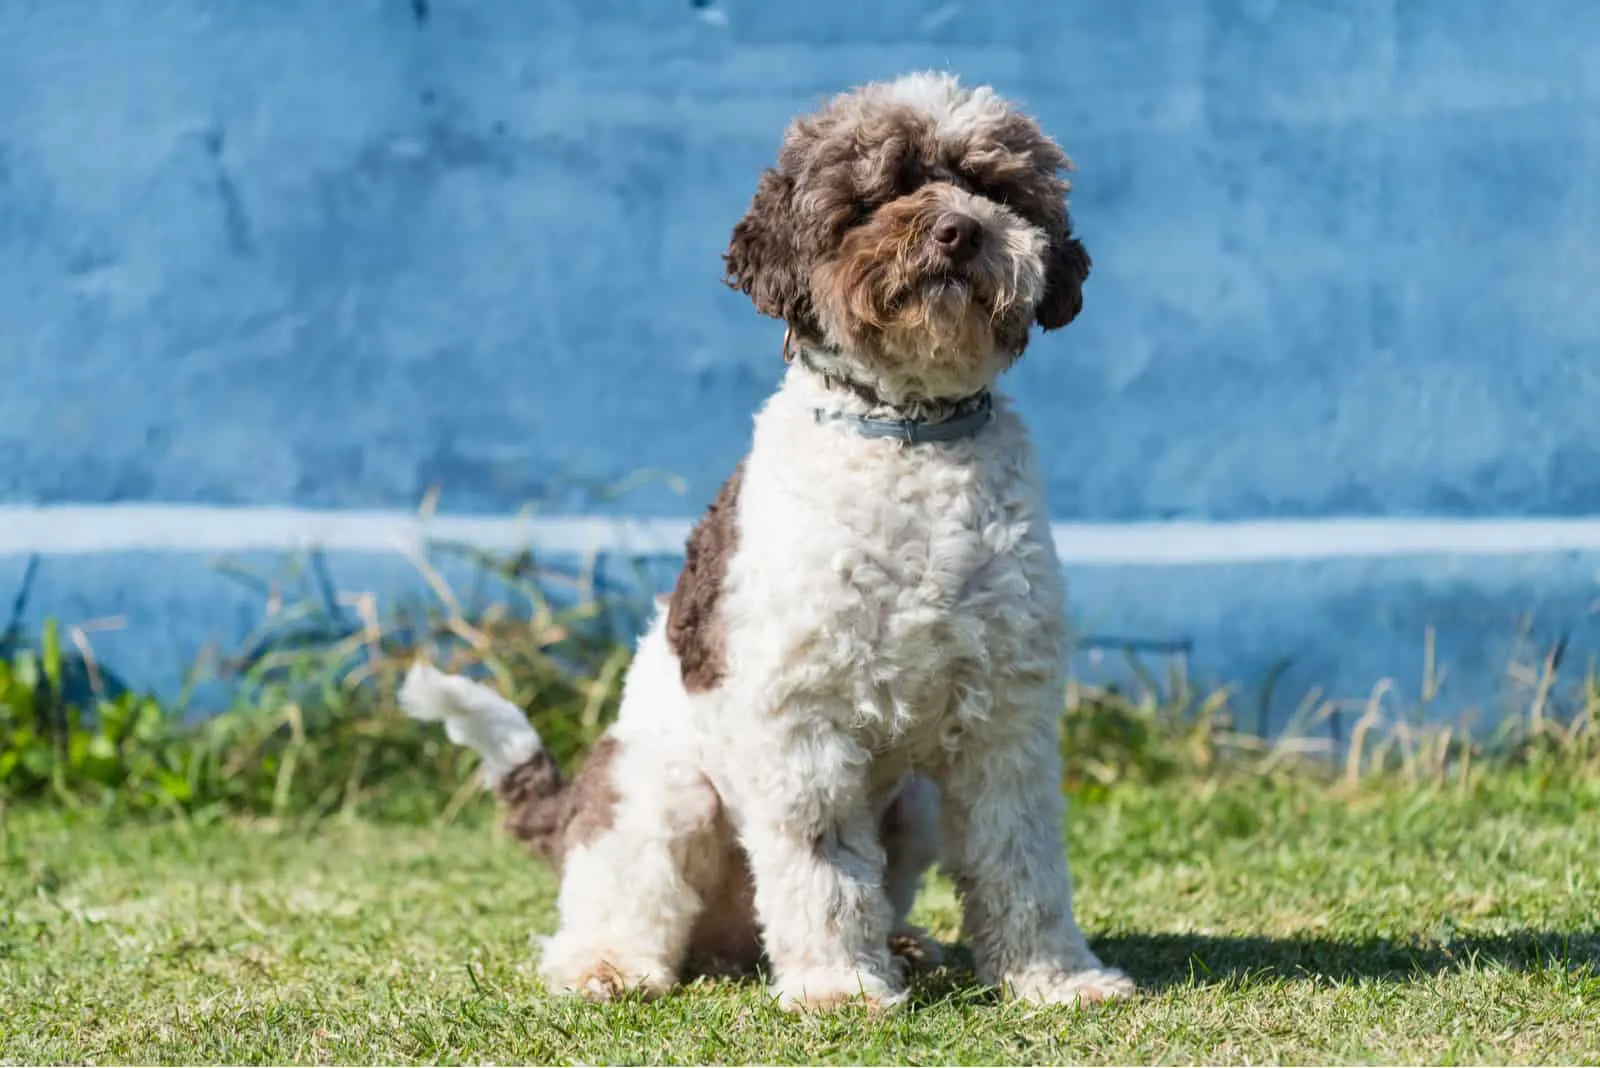 Lagotto Romagnolo dog sitting outdoor on the grass